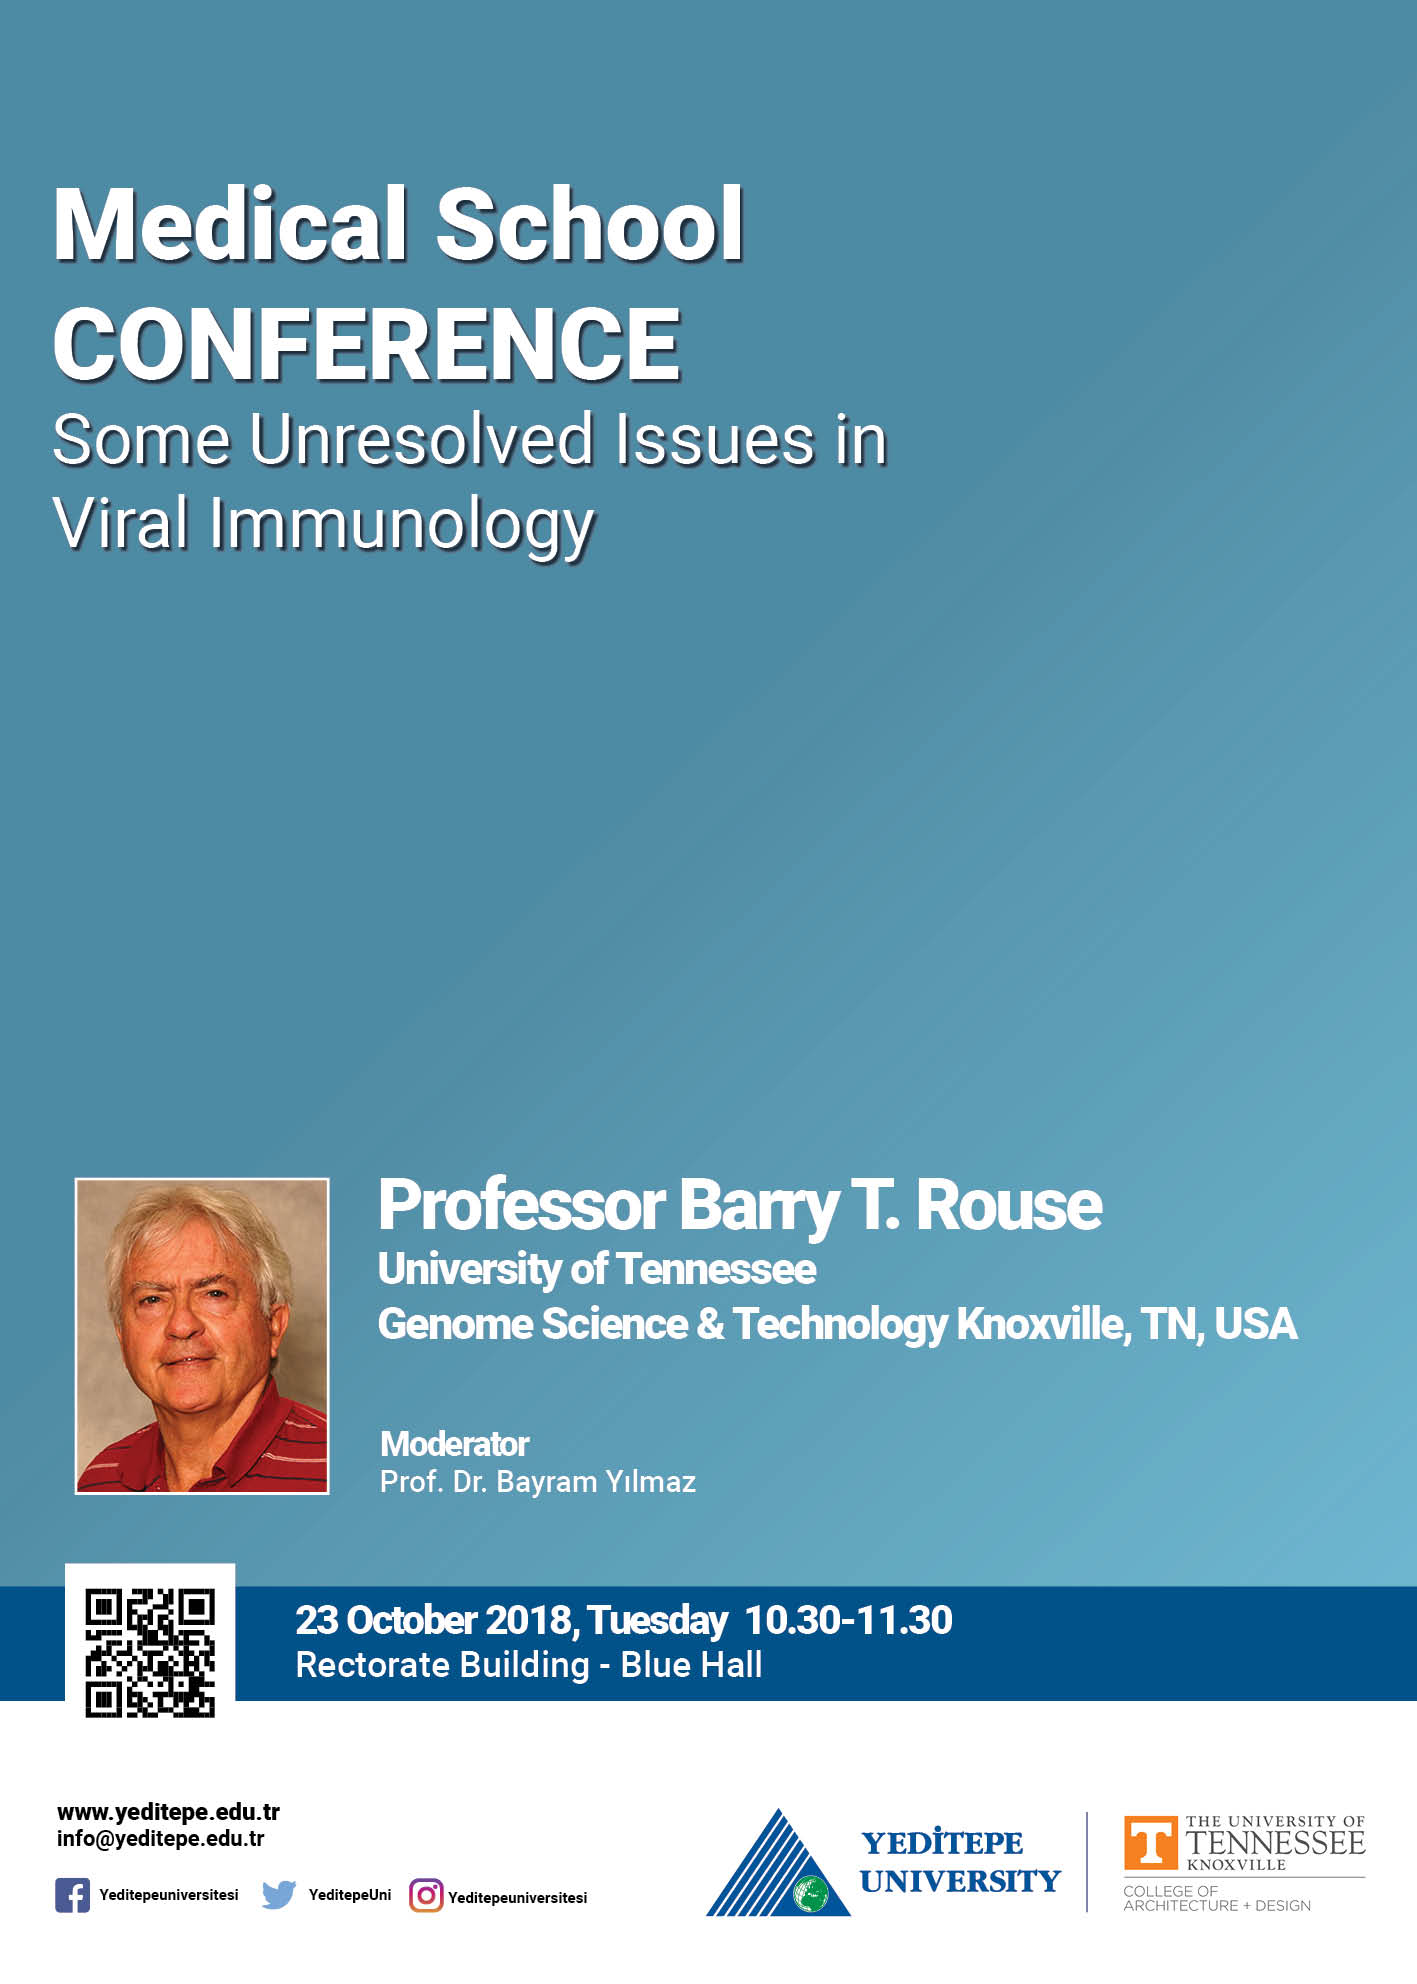 Some Unresolved Issues in Viral Immunology